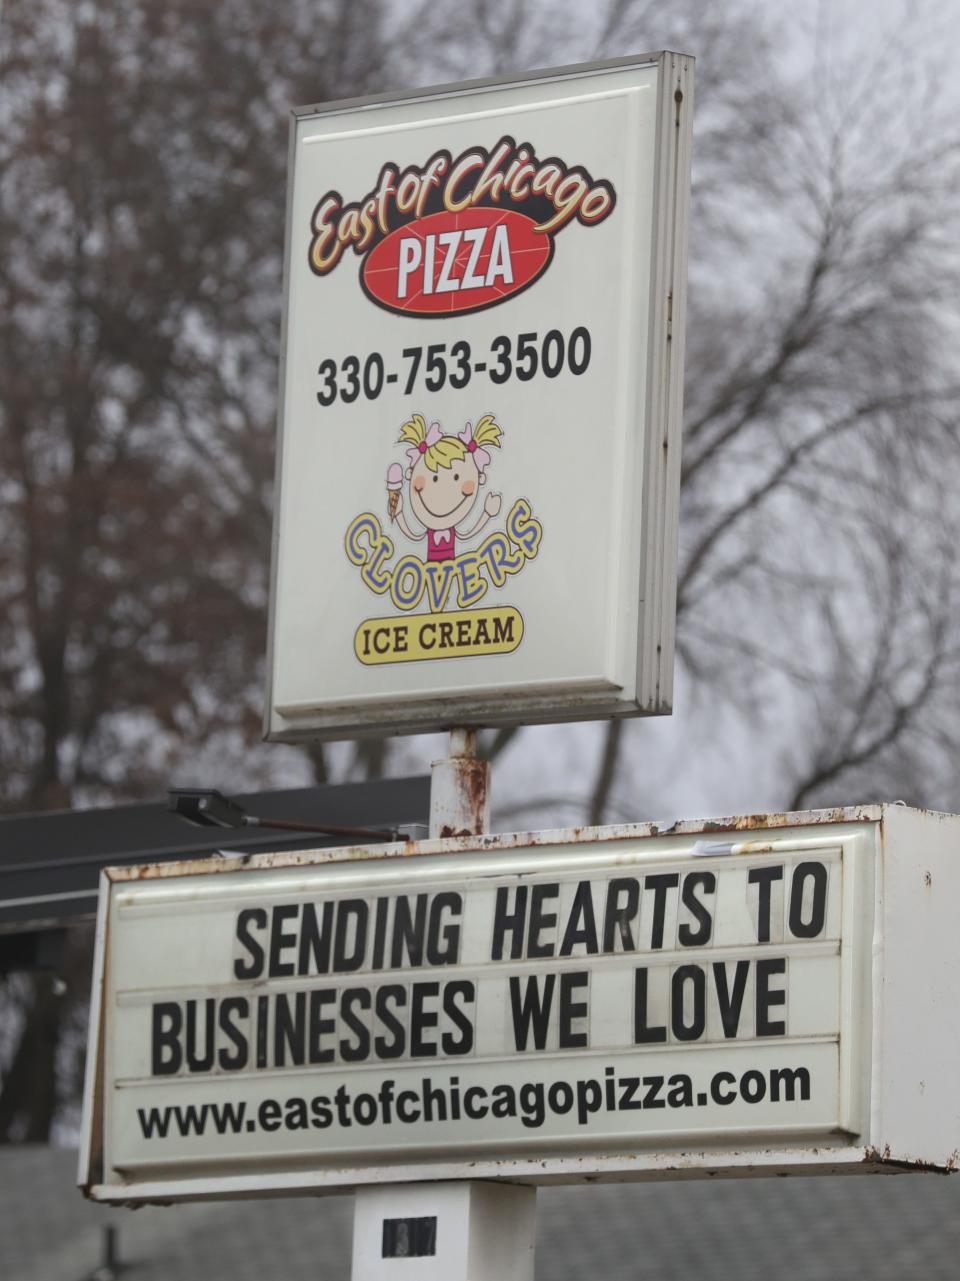 Owner Jeremy Clemetson's East of Chicago Pizza on Shannon Avenue is one of the instigators of Barberton's sign wars.